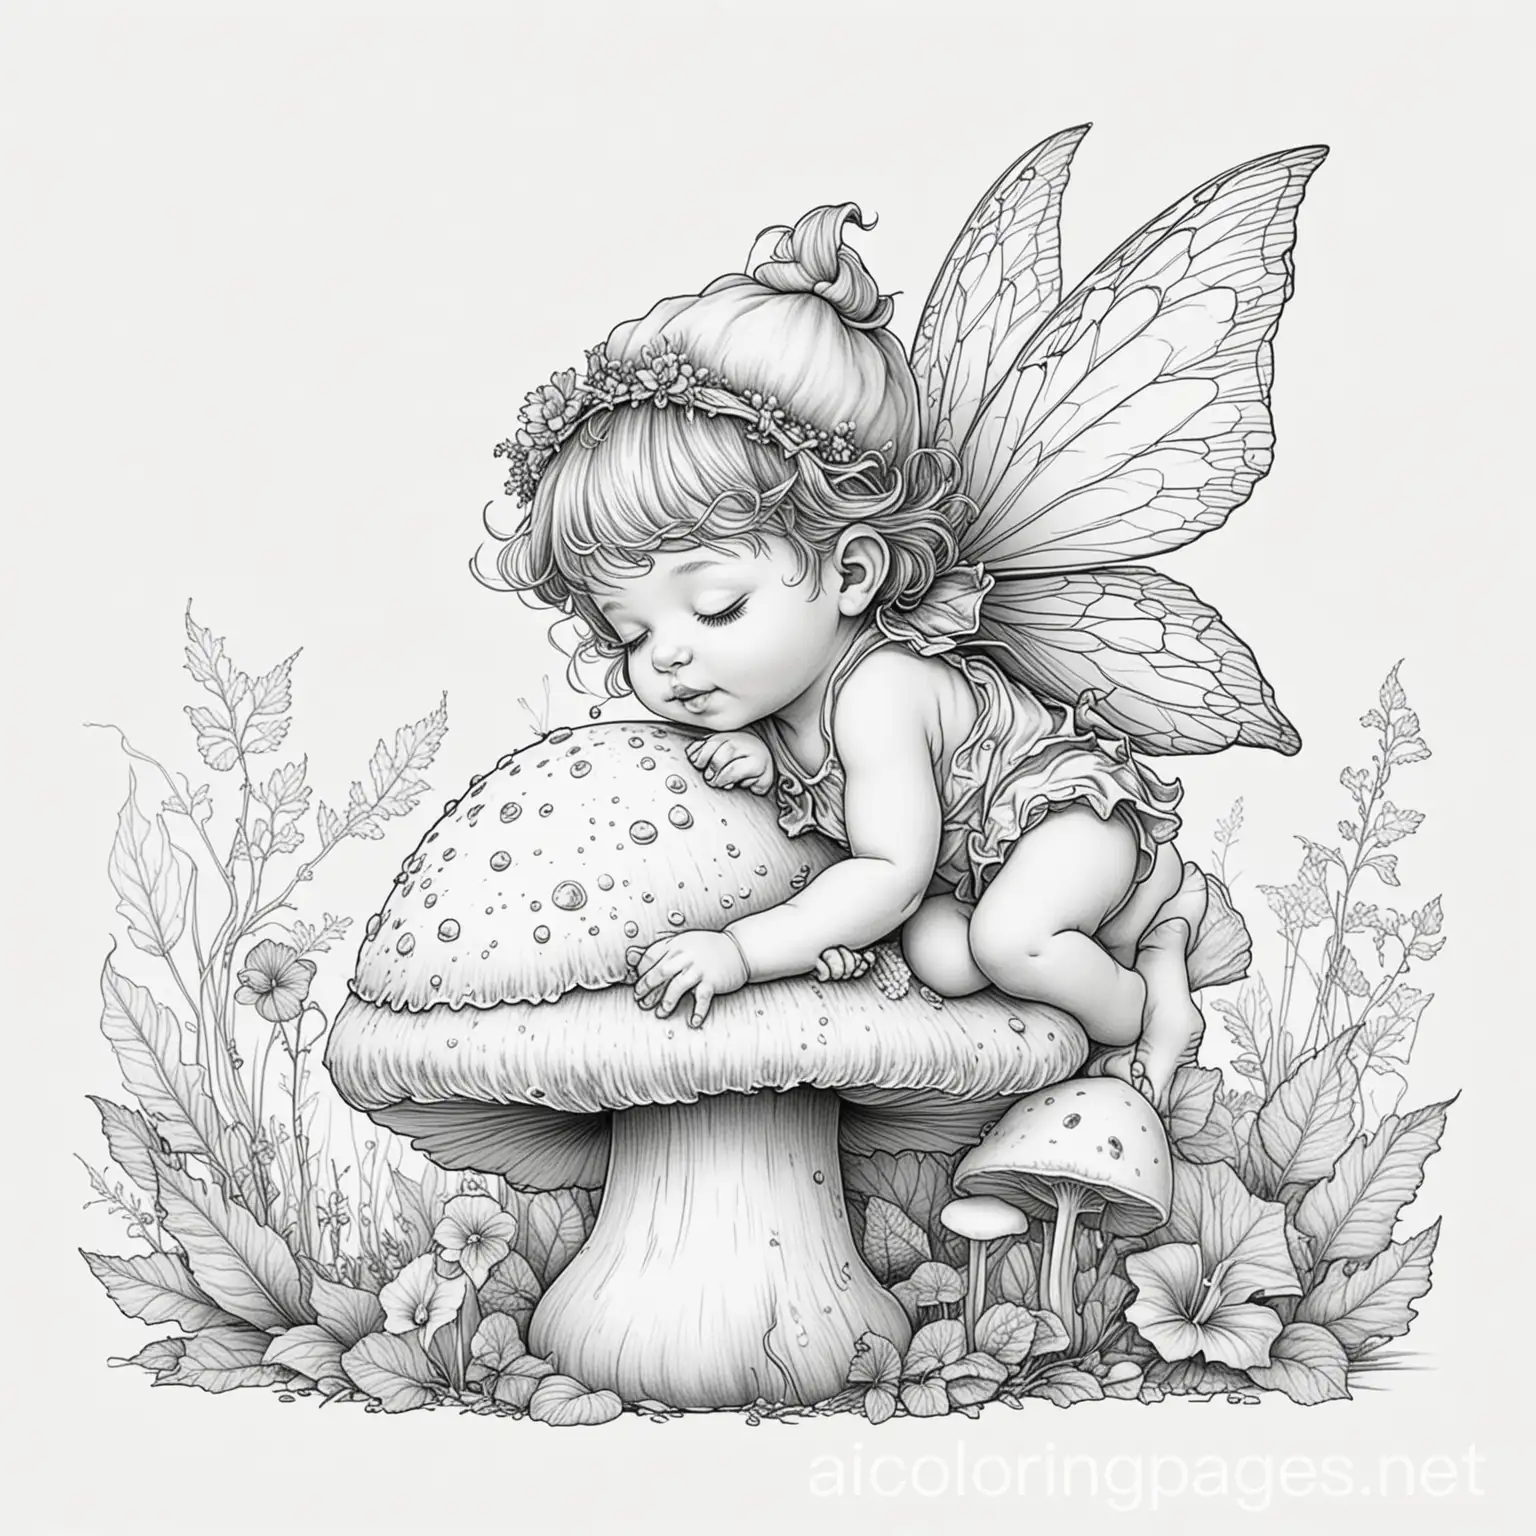 coloring page of a baby fairy sleeping on a mushroom, Coloring Page, black and white, line art, white background, Simplicity, Ample White Space. The background of the coloring page is plain white to make it easy for young children to color within the lines. The outlines of all the subjects are easy to distinguish, making it simple for kids to color without too much difficulty